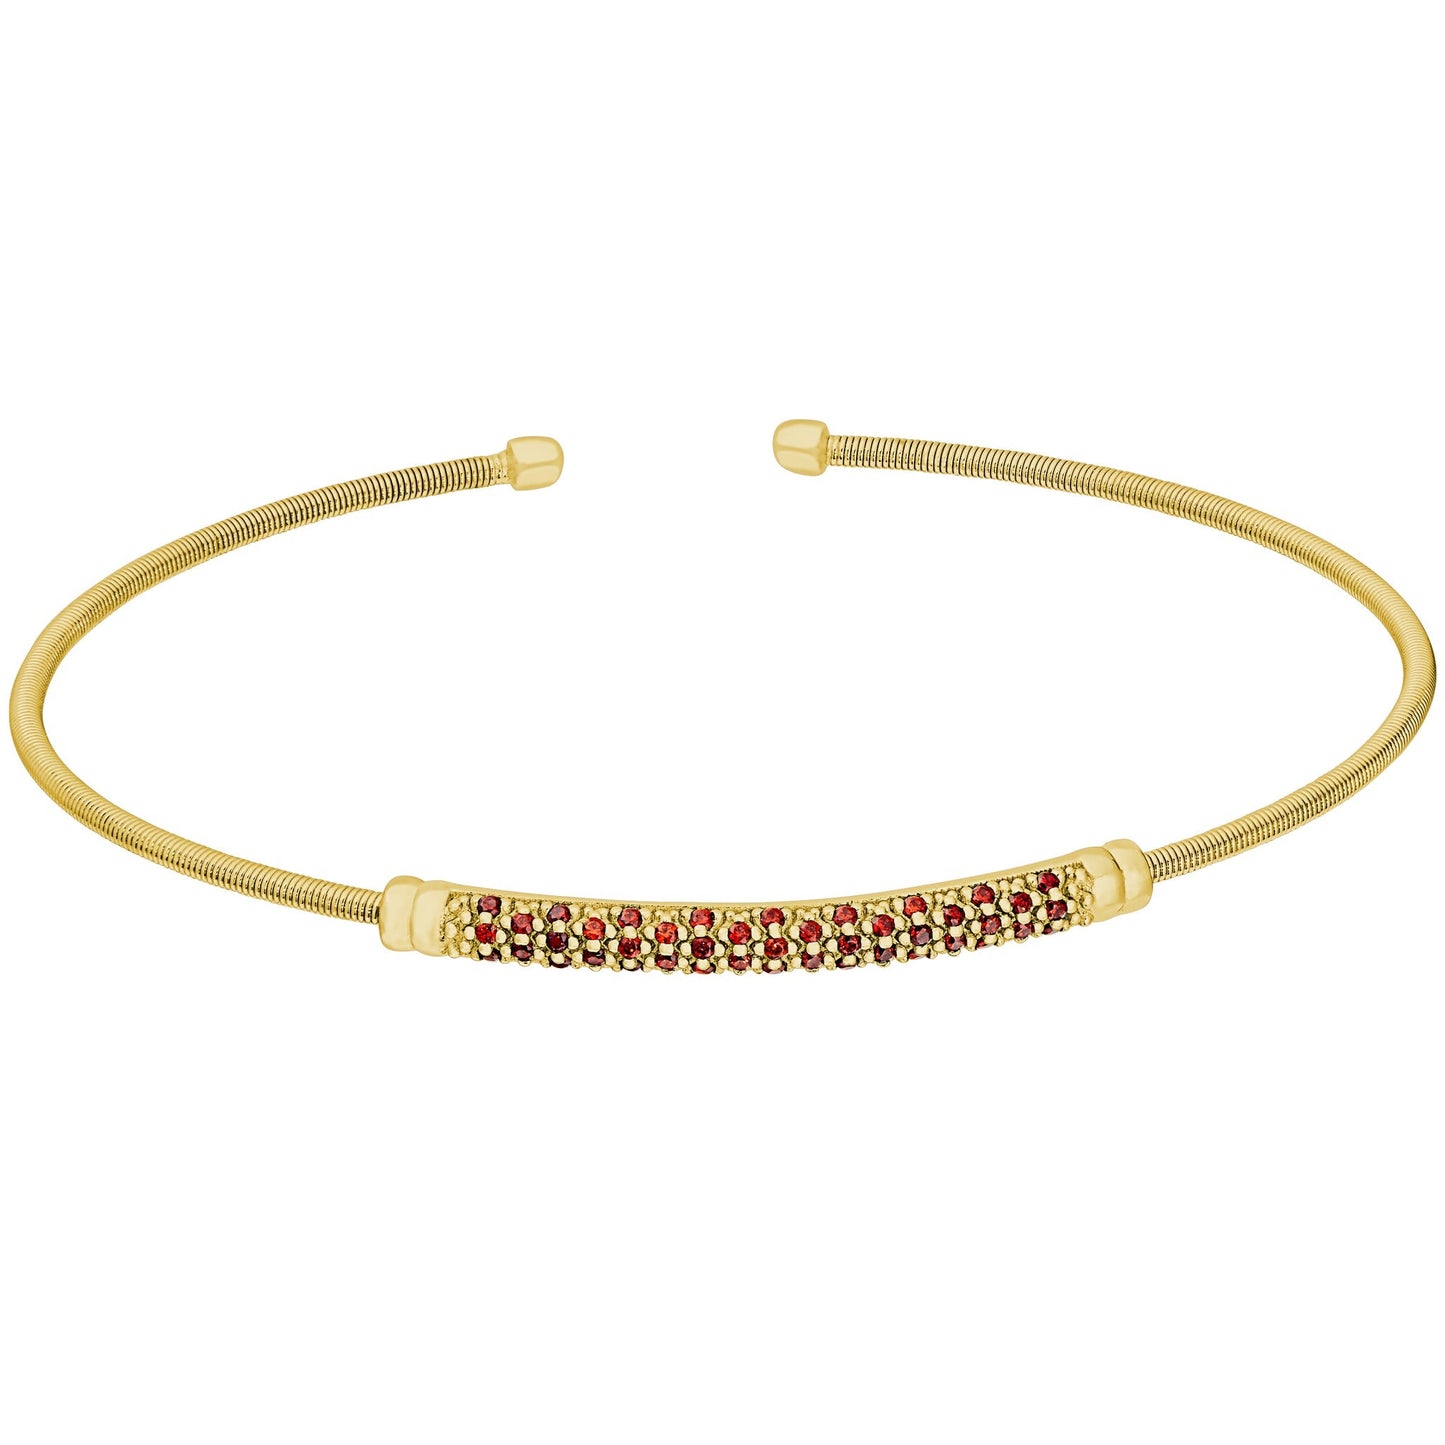 A birthstone flexible cable bracelet with simulated gemstones displayed on a neutral white background.